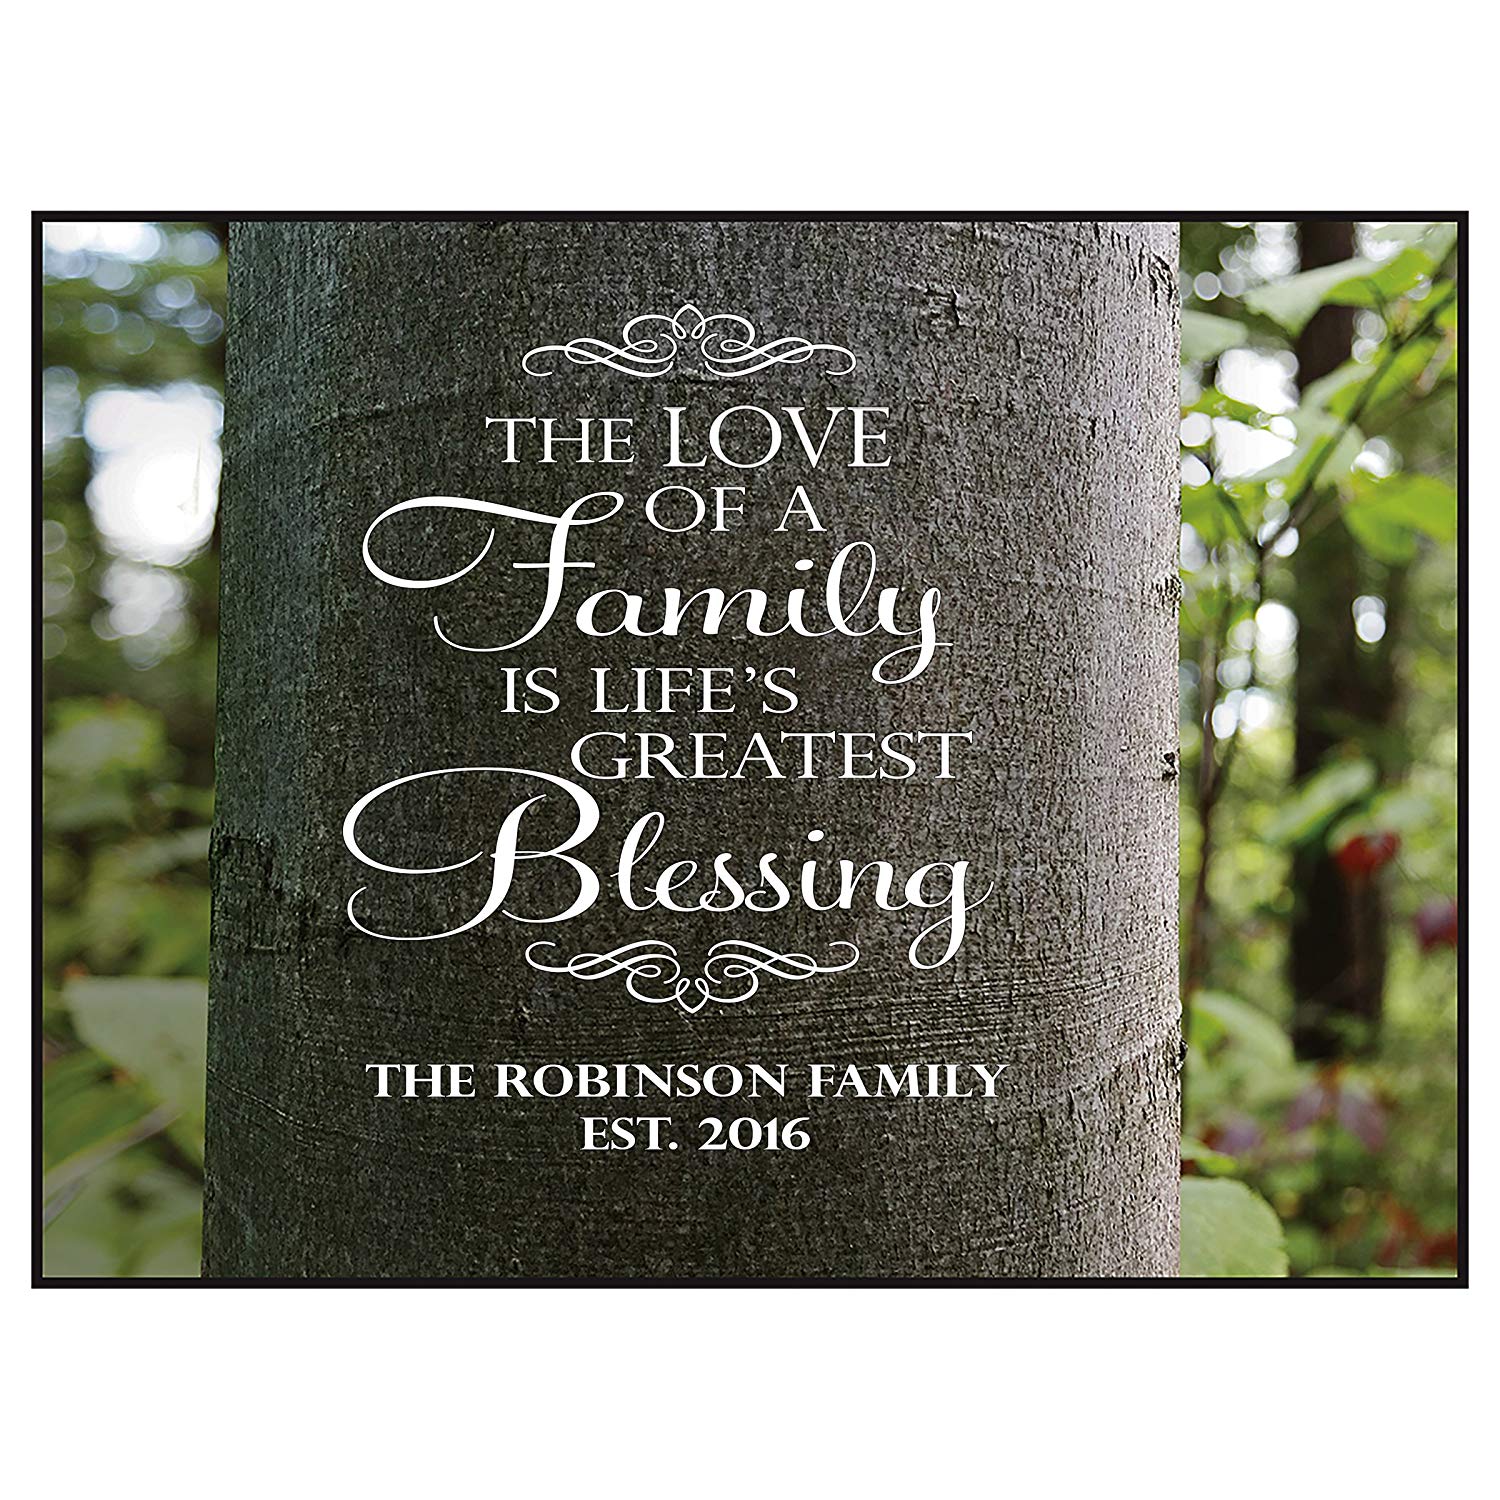 Personalized Family Name Established Date Sign - The Love of a Family - LifeSong Milestones